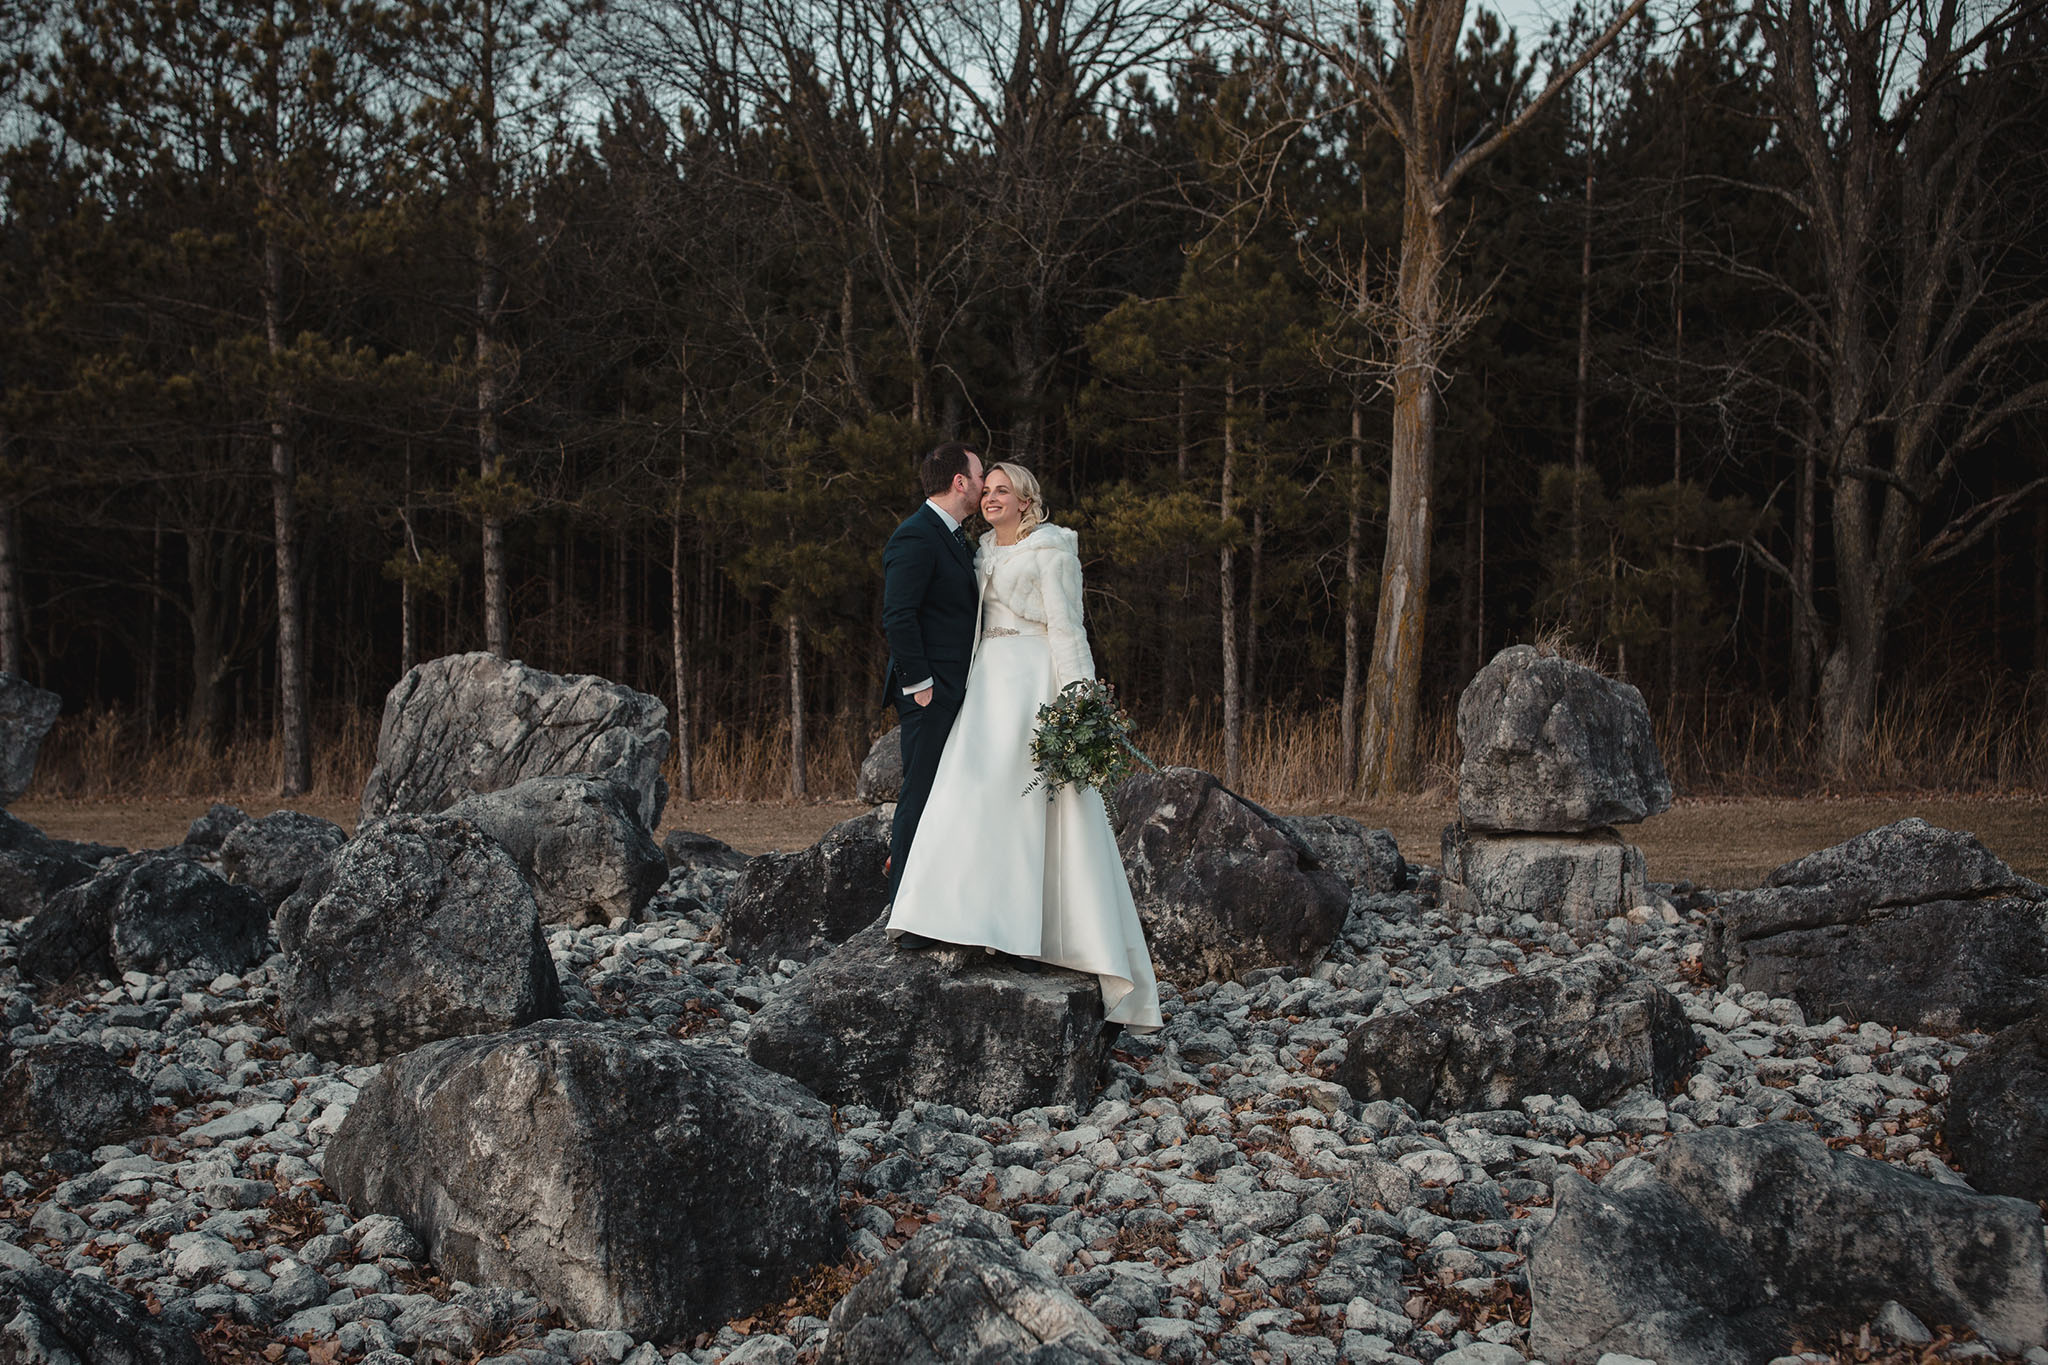 Winter wedding , couple standing on large rocks in front of lake. Bride wearing floor length winter white wedding dress with greenery floral and white fur stole to keep warm. Groom wearing classic dark blue suit with tie.